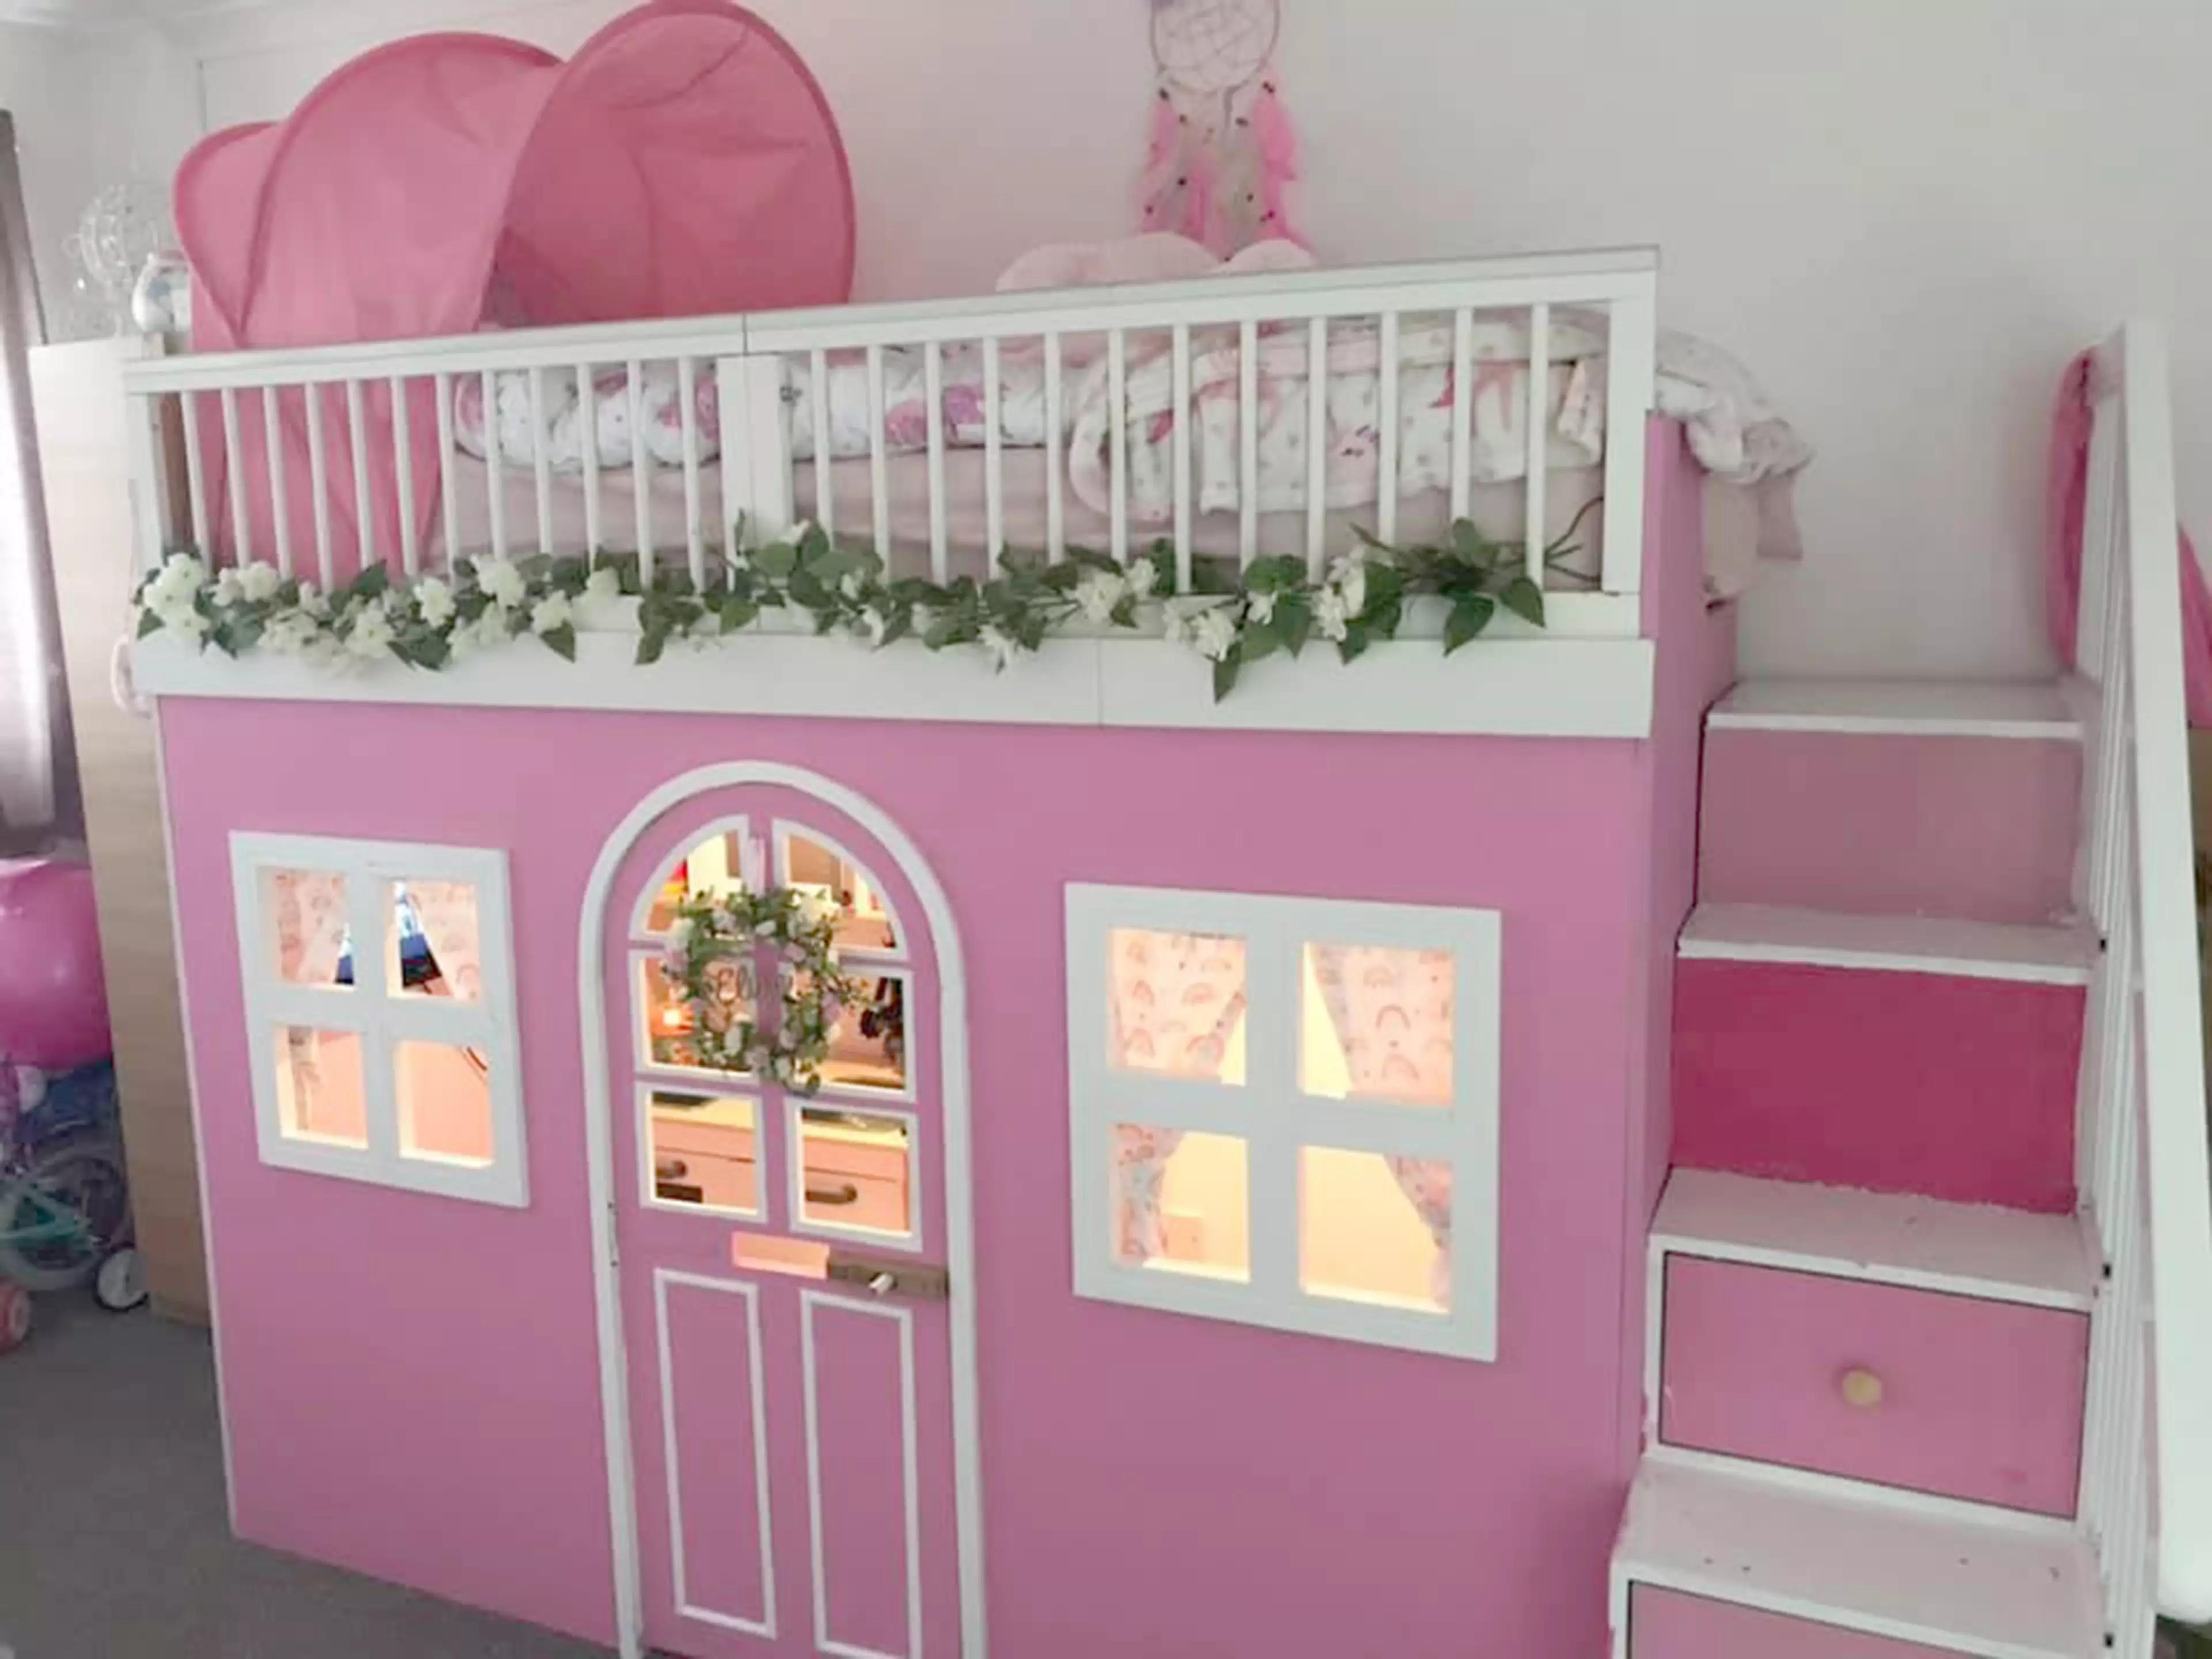 Eliza got her dream princess bed for just £20 (